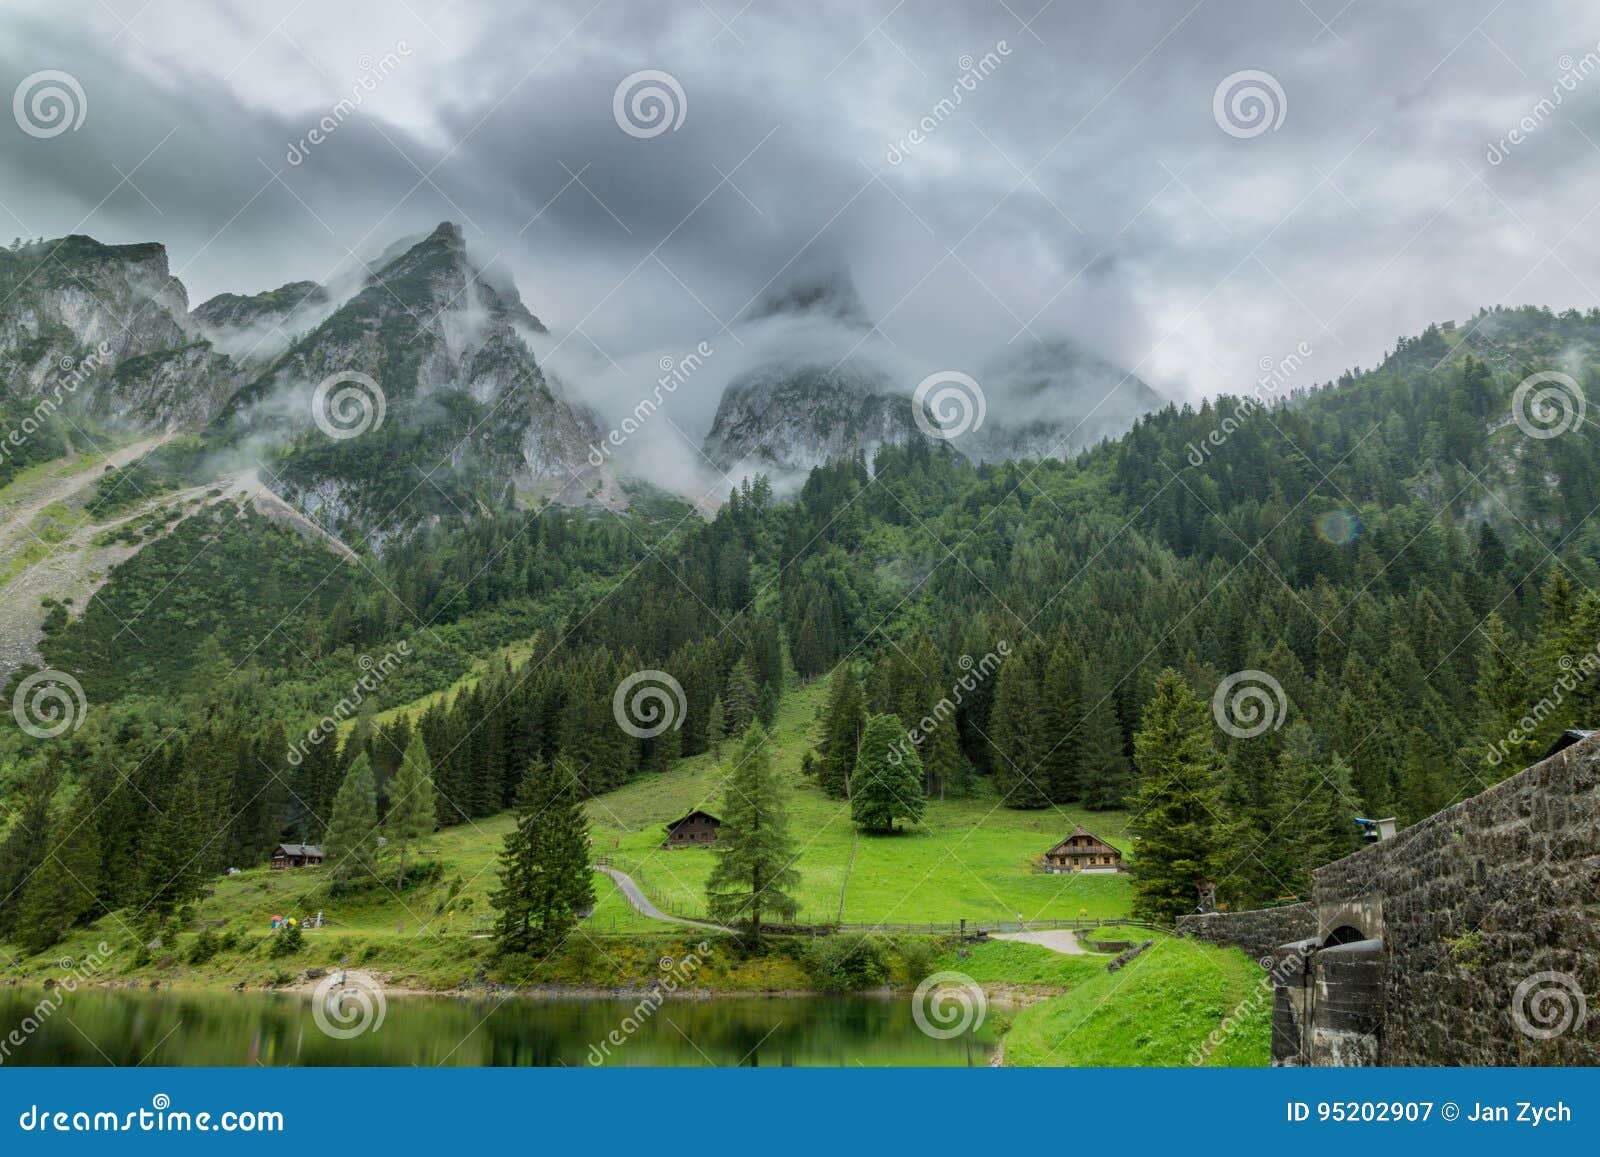 Gosau Valley before the Storm Stock Image - Image of country, austria:  95202907